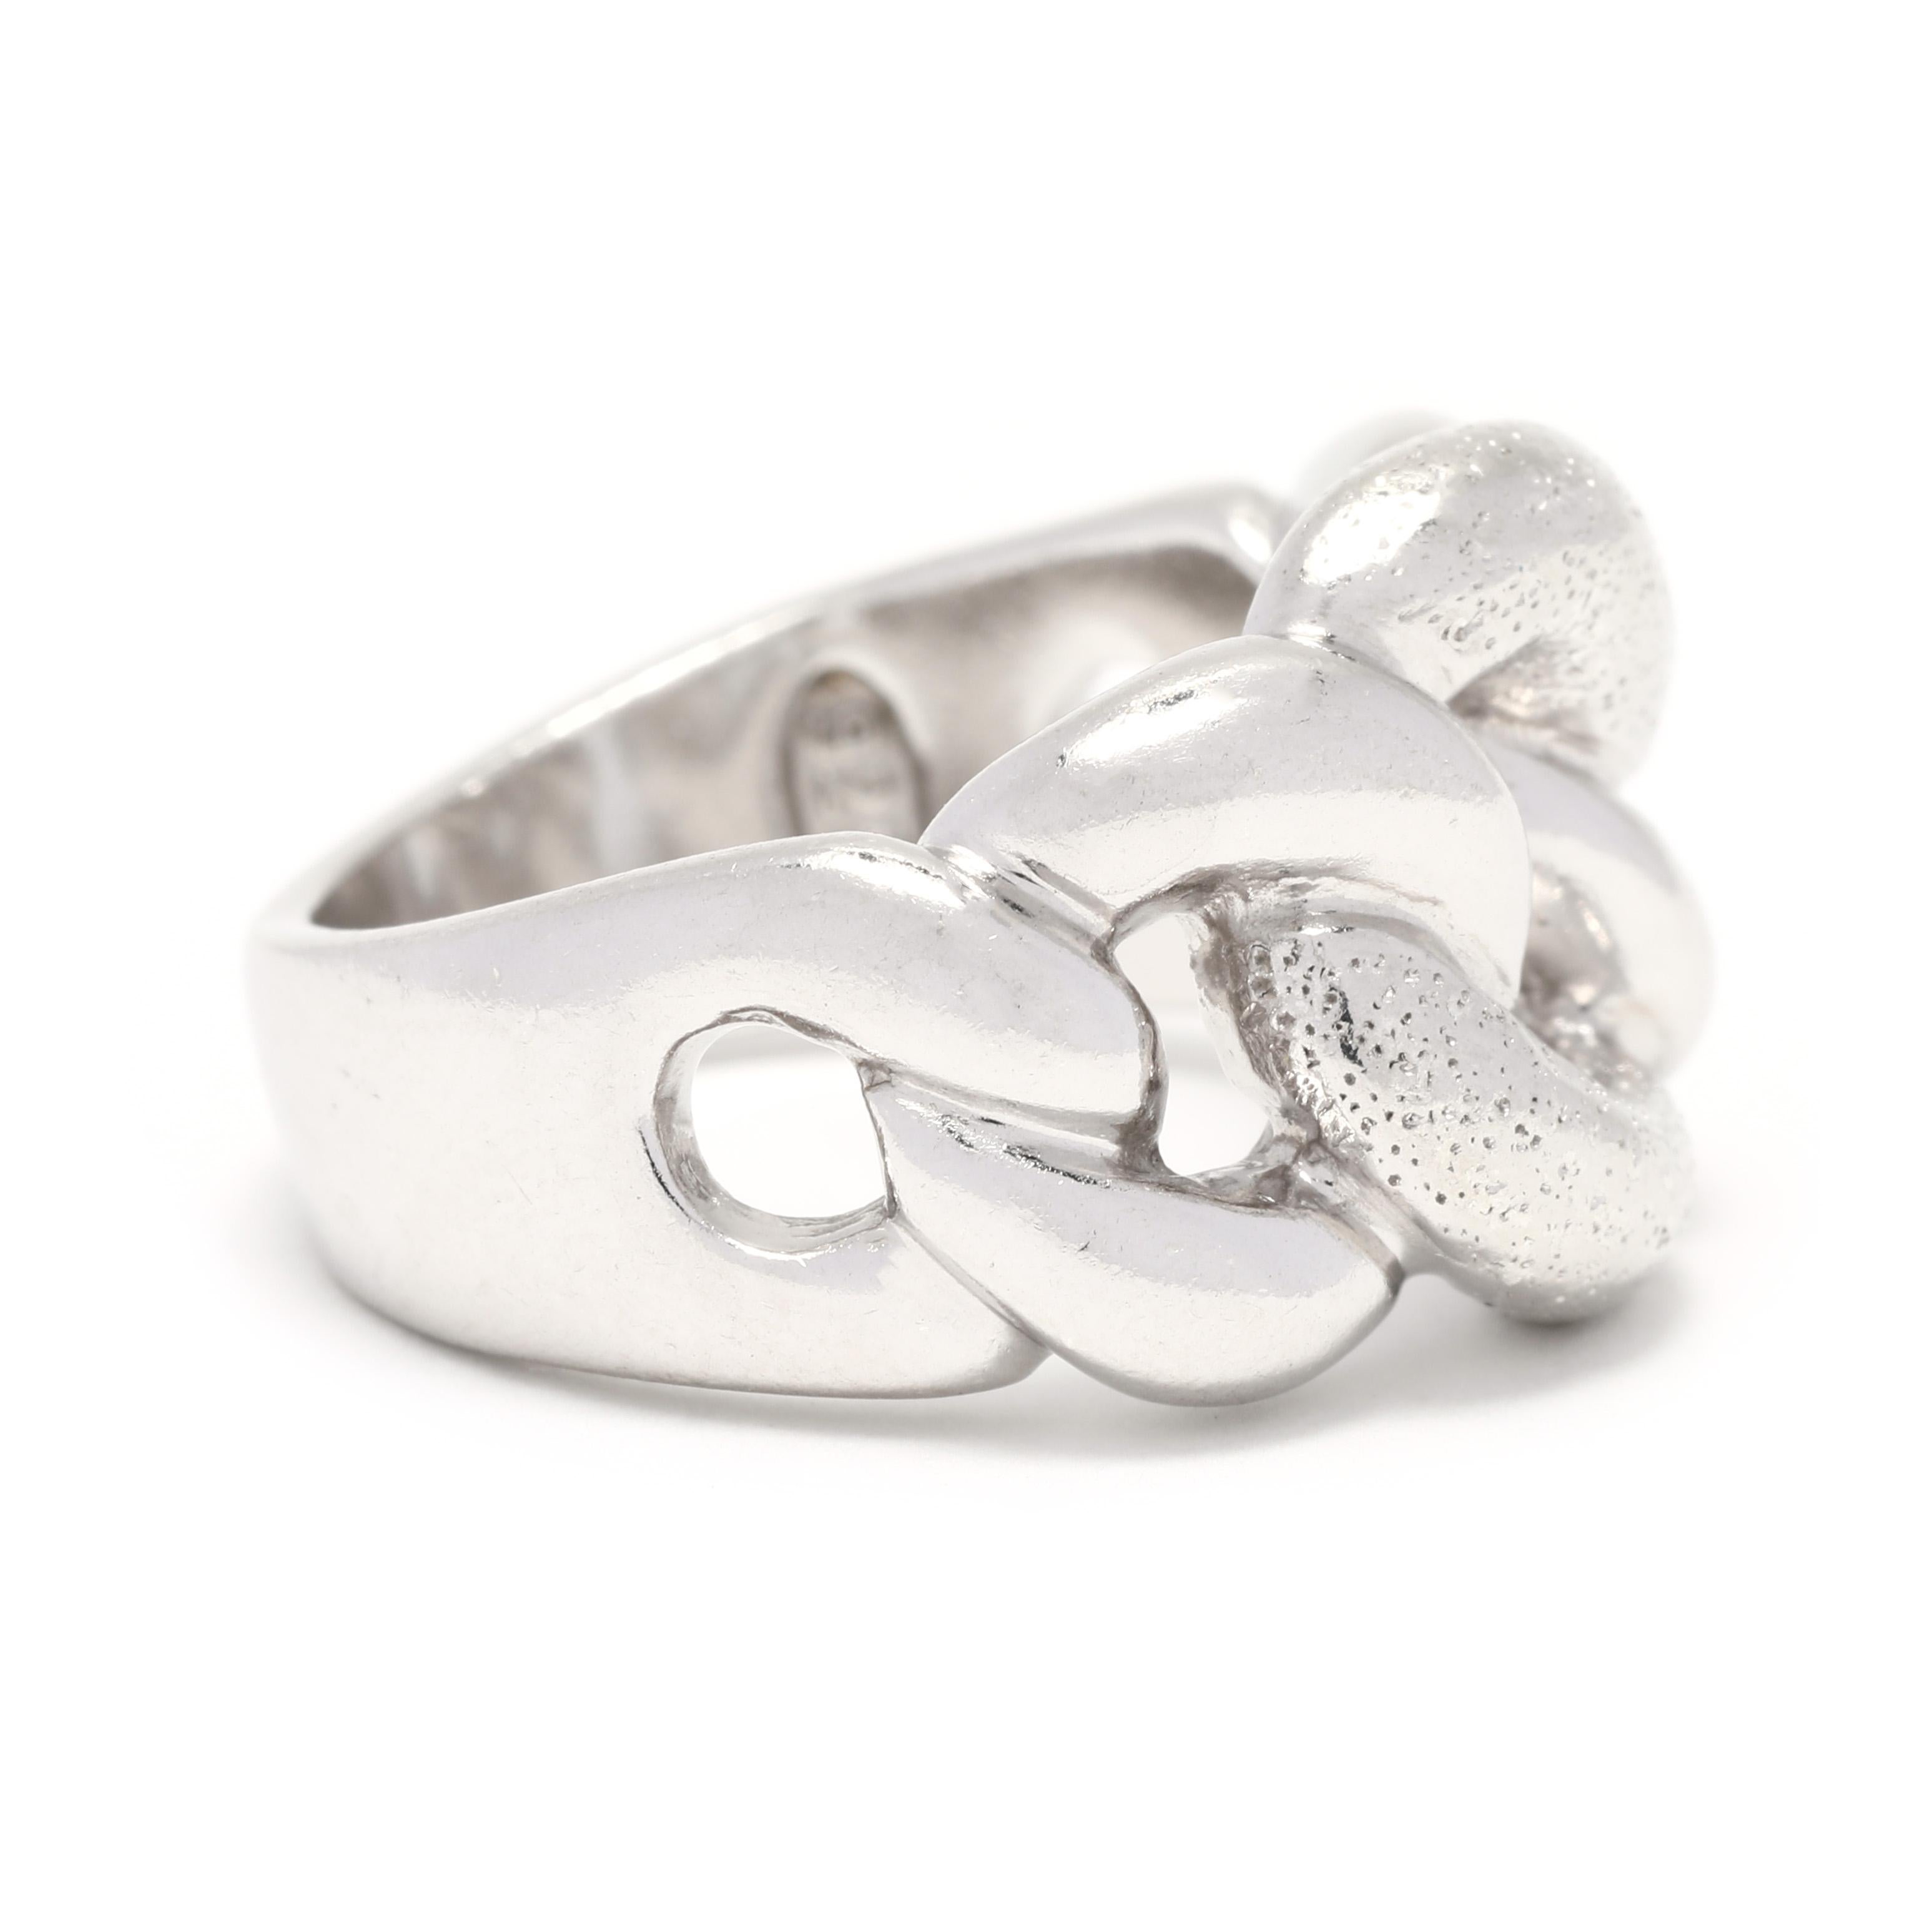 This Peru Tapered Chain Link Ring is a gorgeous, statement-making piece of jewelry. Crafted from sterling silver, this ring features a tapered chain link design to add a unique and modern twist to your look. This simple yet striking silver chain